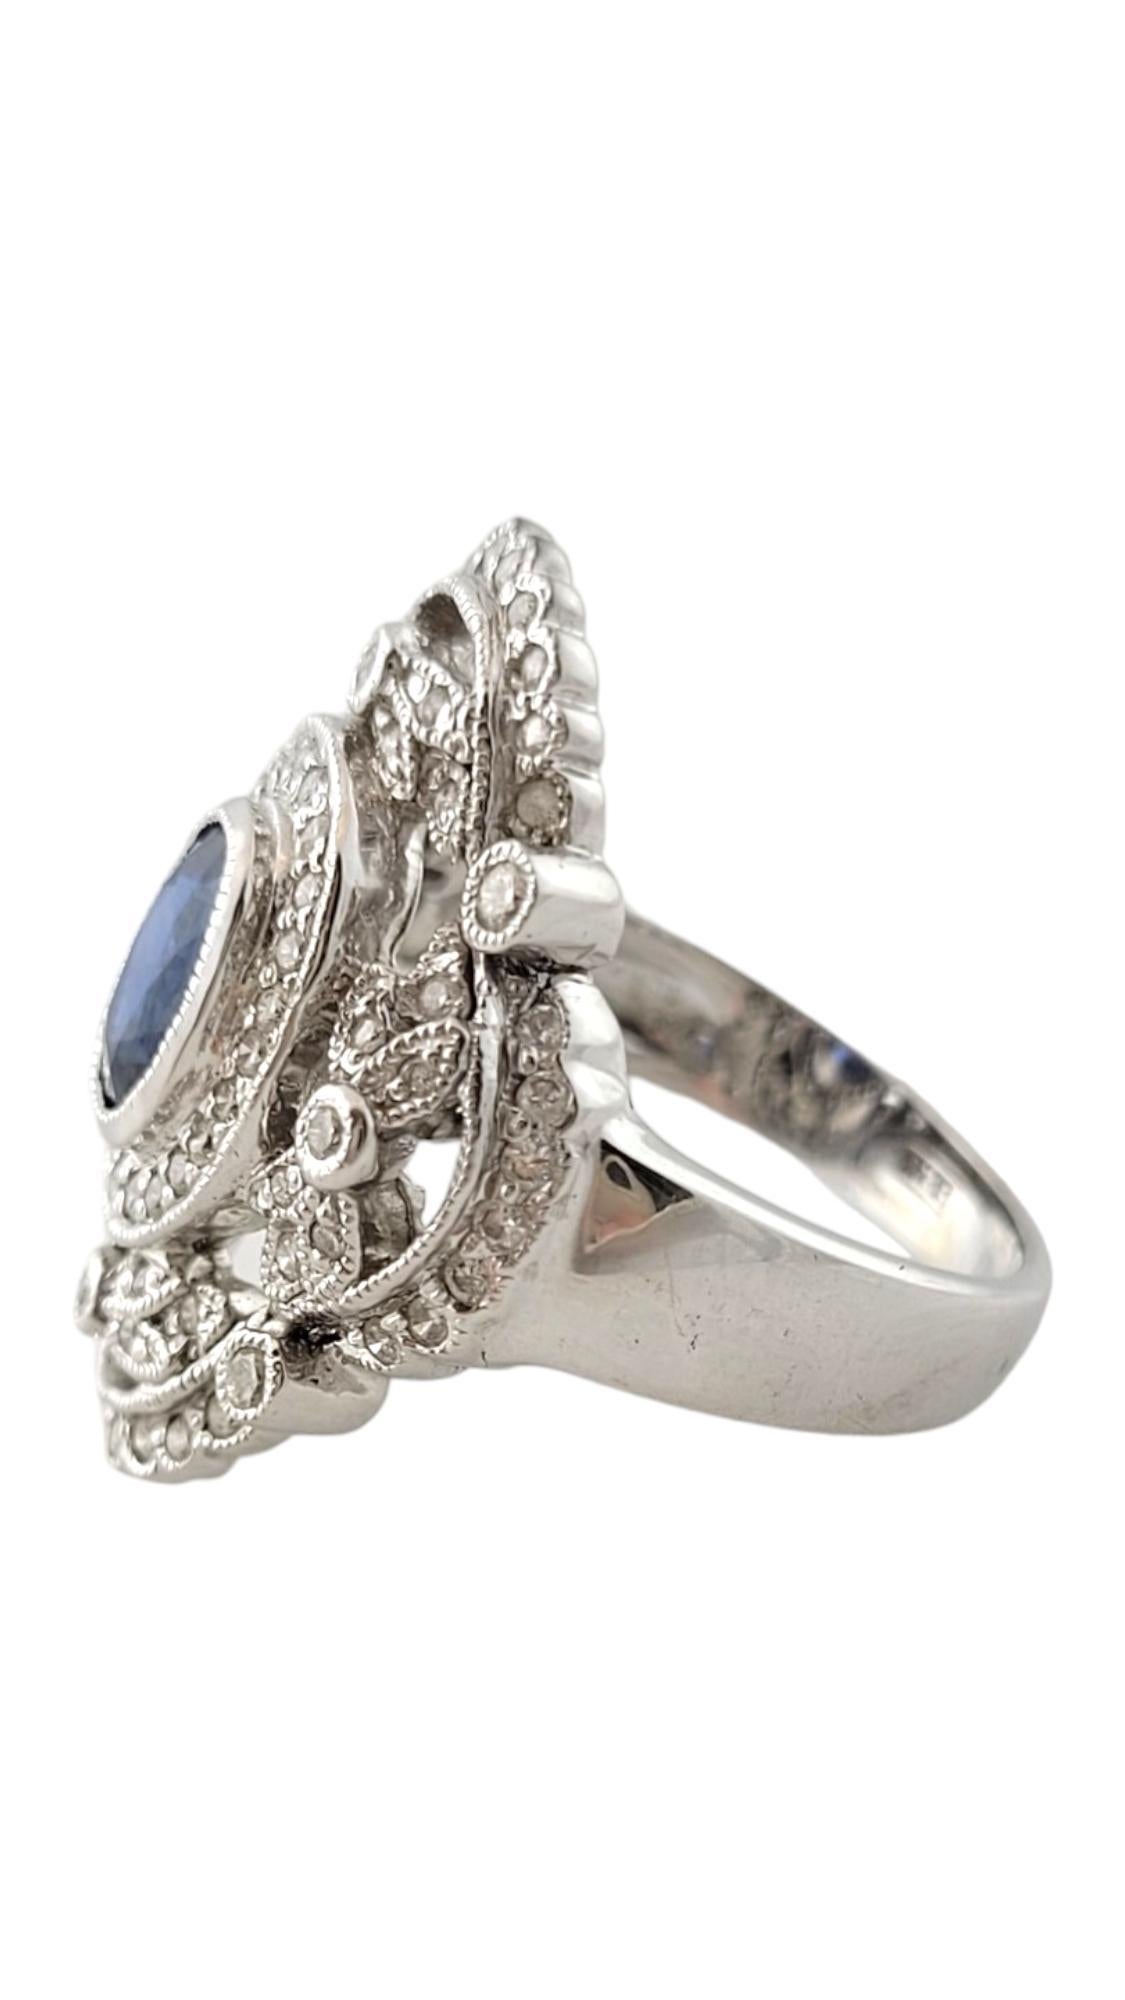 Vintage 18 Karat White Gold Sapphire and Diamond Ring Size 7-

This spectacular ring features one oval sapphire (approx. 7 mm x 5 mm) and 64 round brilliant cut diamonds set in beautifully detailed 18K white gold.  

Natural oval blue sapphire is